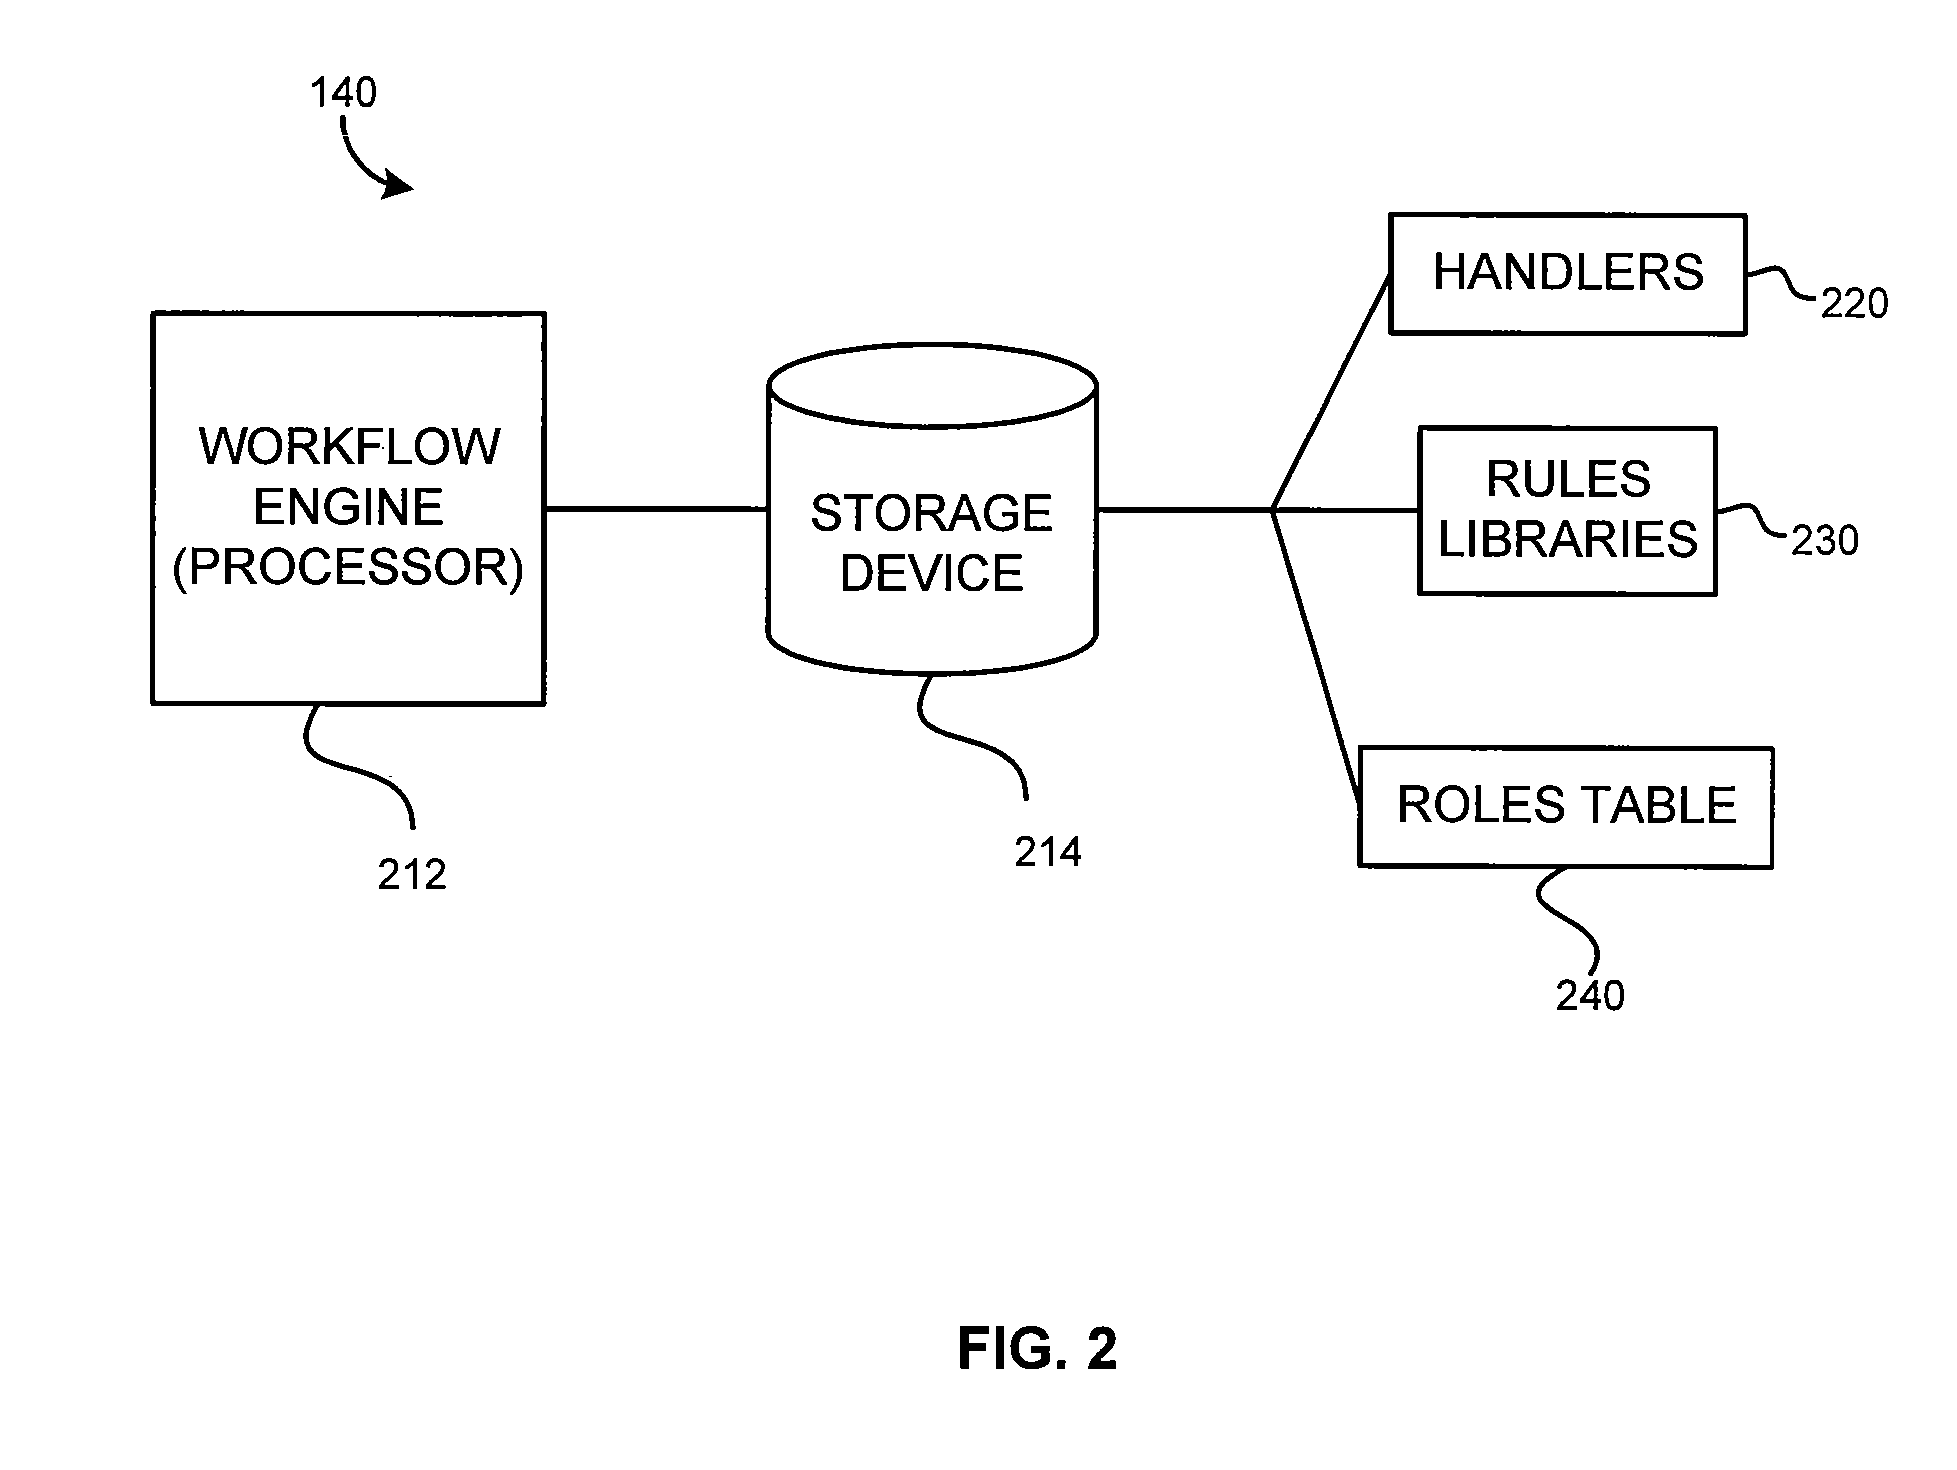 Identity management system for managing access to resources